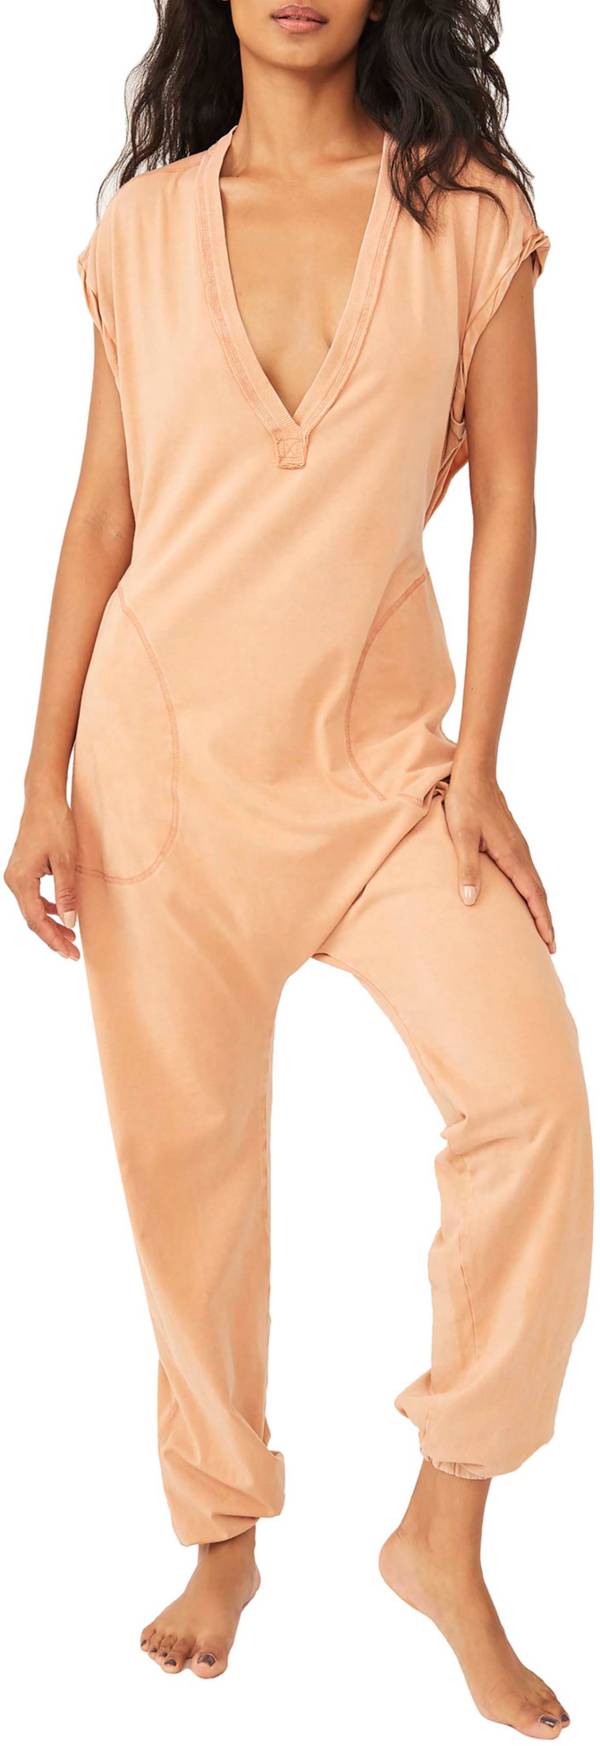 FP Movement by Free People Women's Hot Shot V-Neck Onesie product image